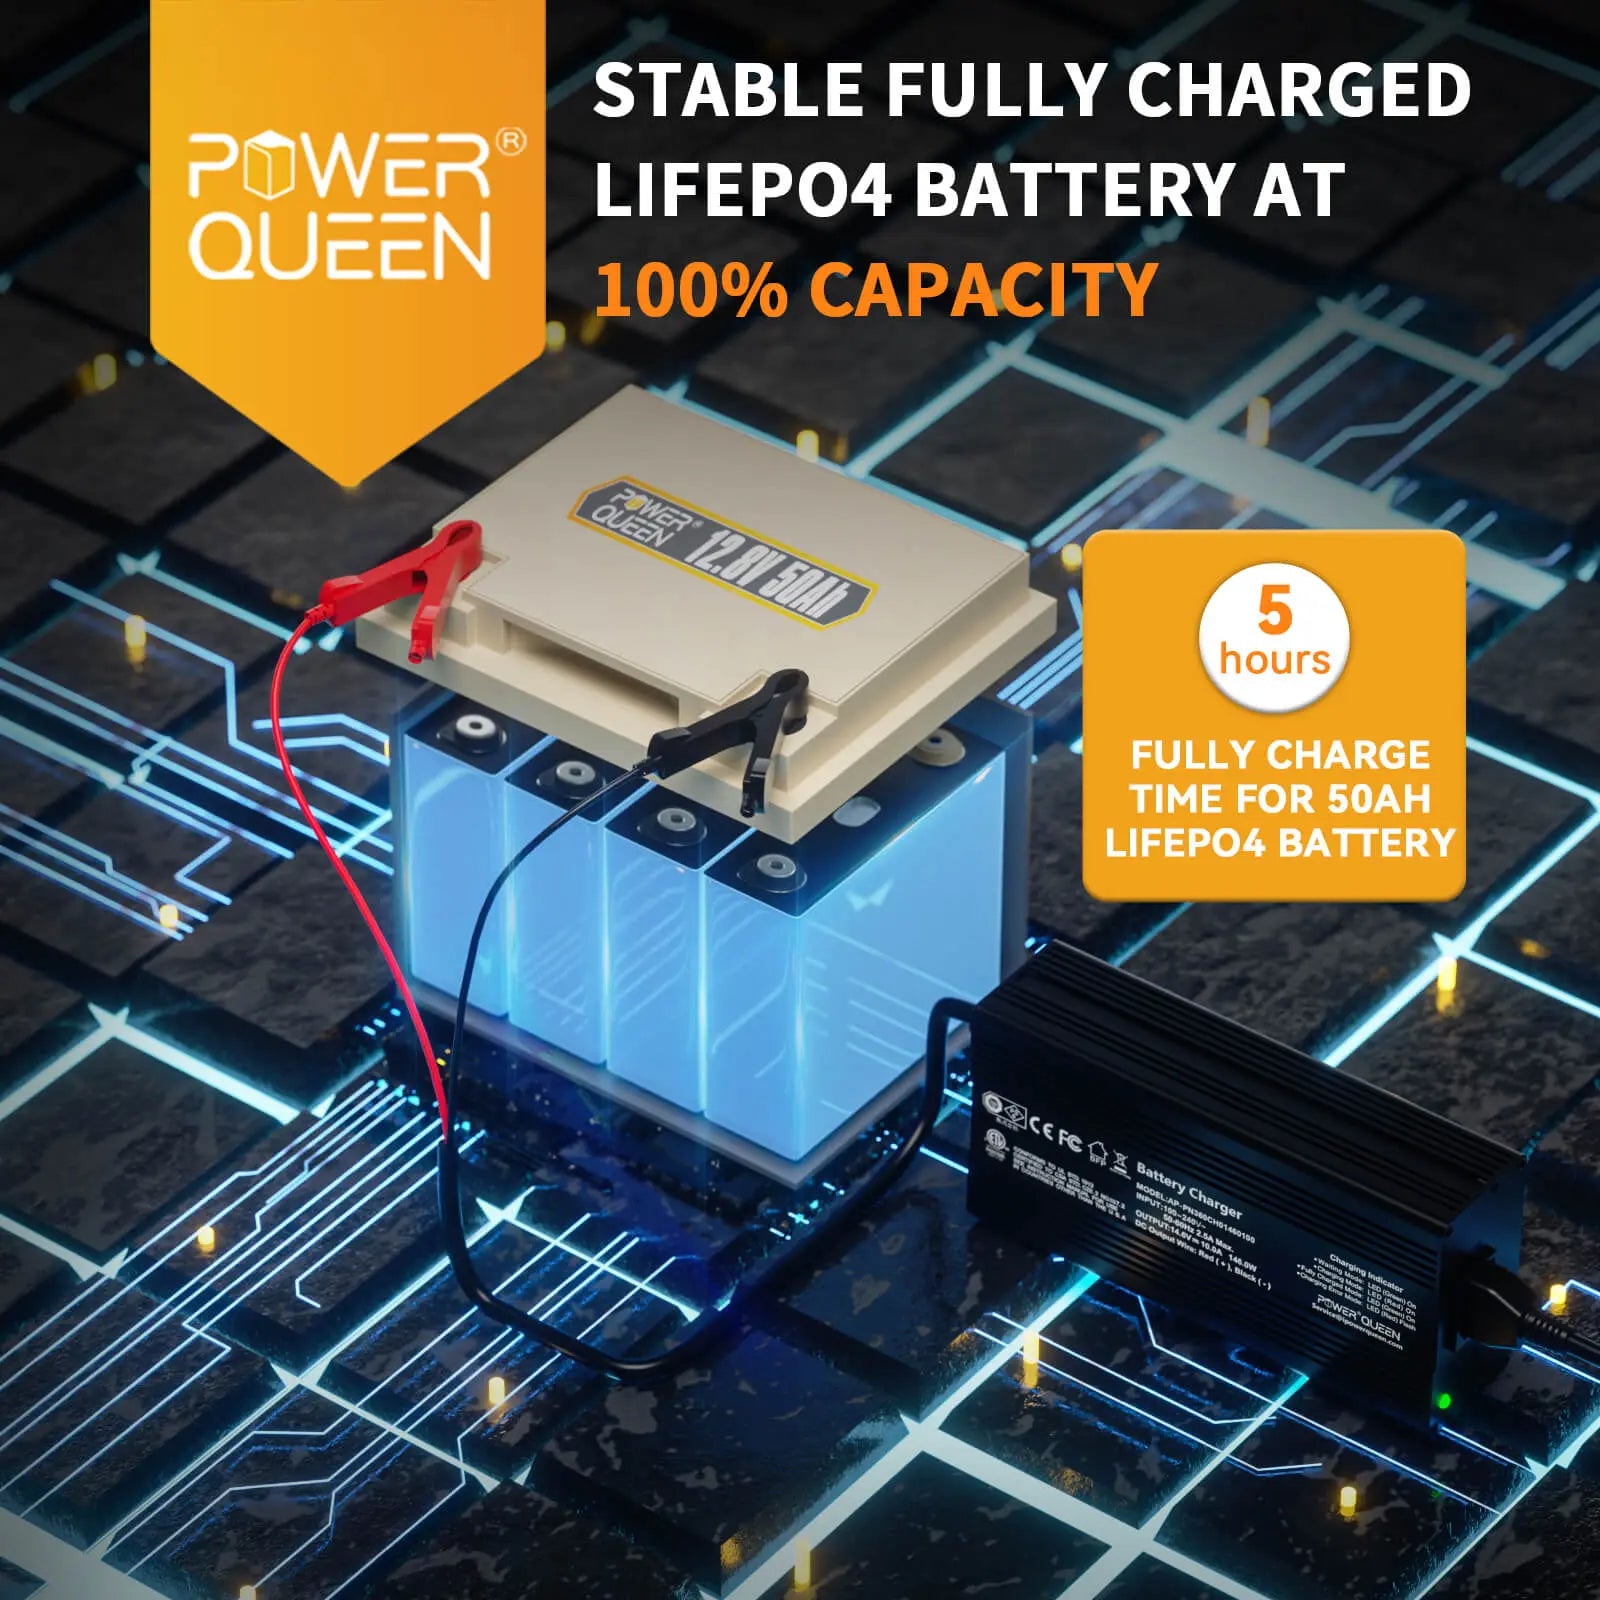 Power Queen 12.8V 50Ah LiFePO4 Battery with 14.6V 10A Automatic Smart LiFePO4 Battery Charger Power Queen